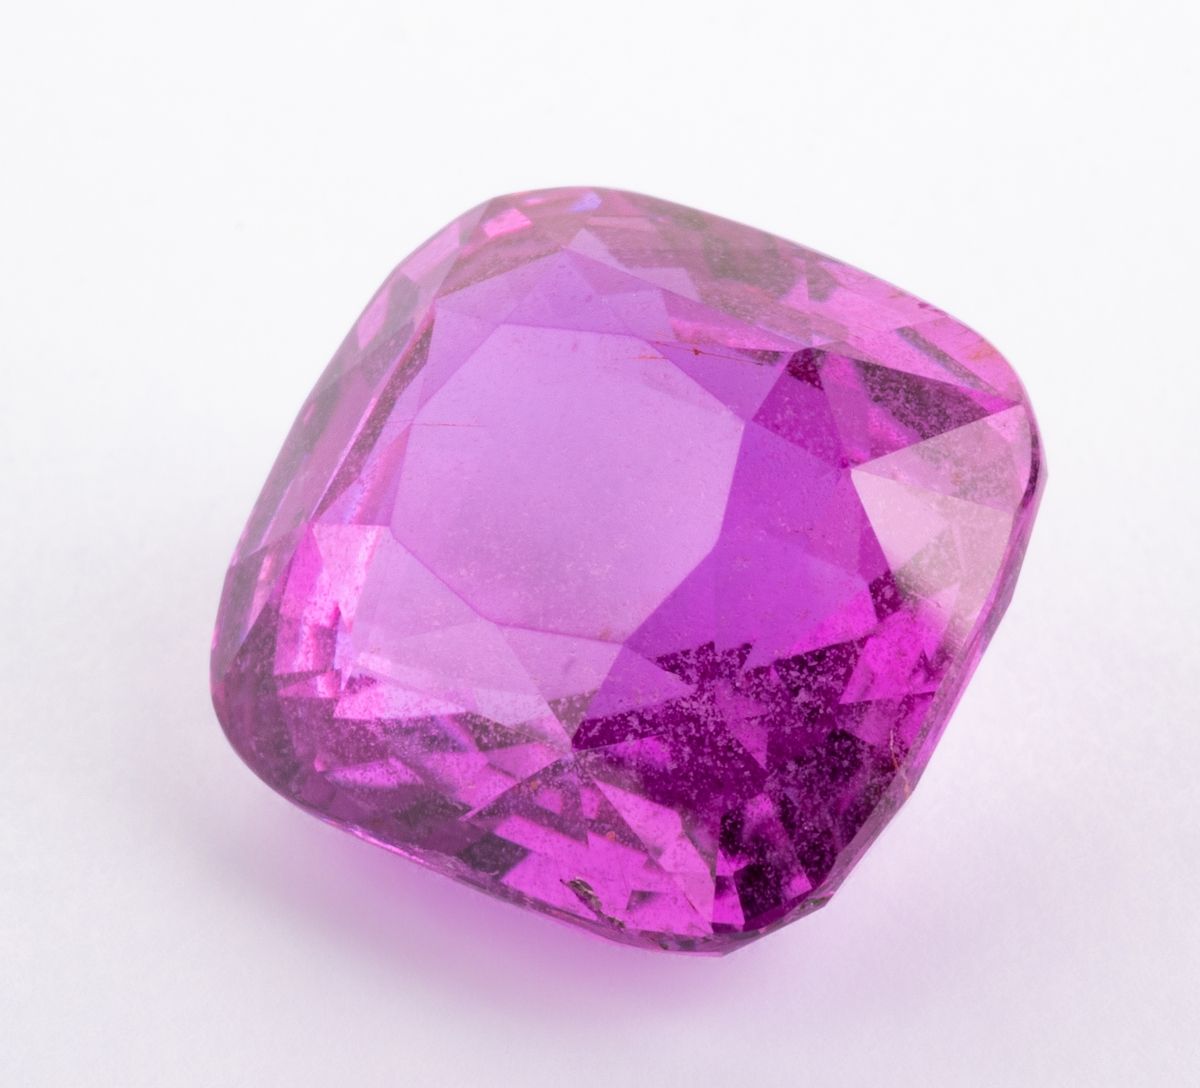 Null 9 ct. Modified cushion cut pink sapphire with intense color. This stone is &hellip;